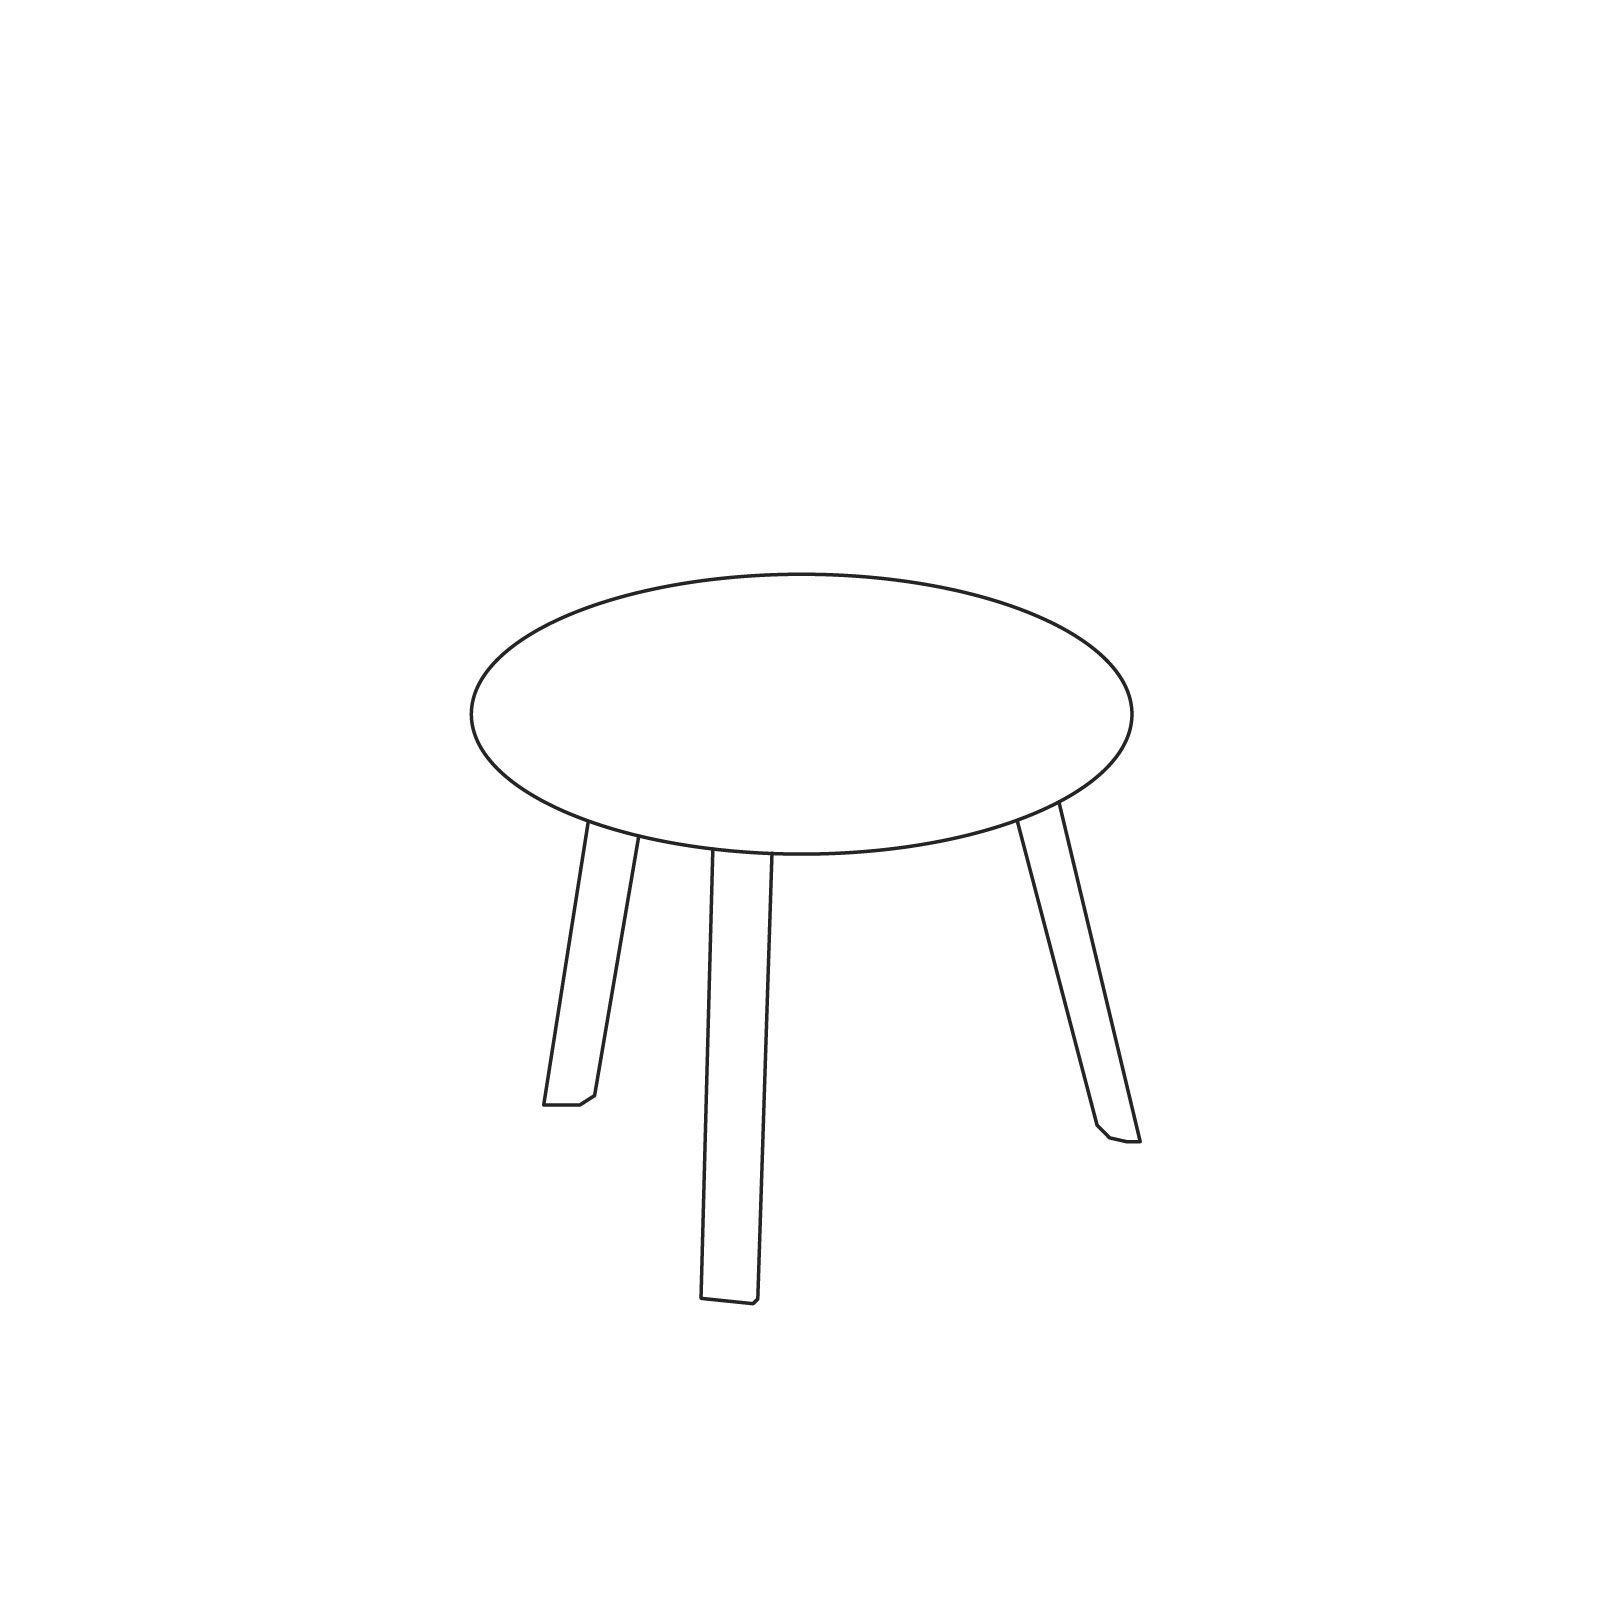 A line drawing of Bella Side Table–Low.